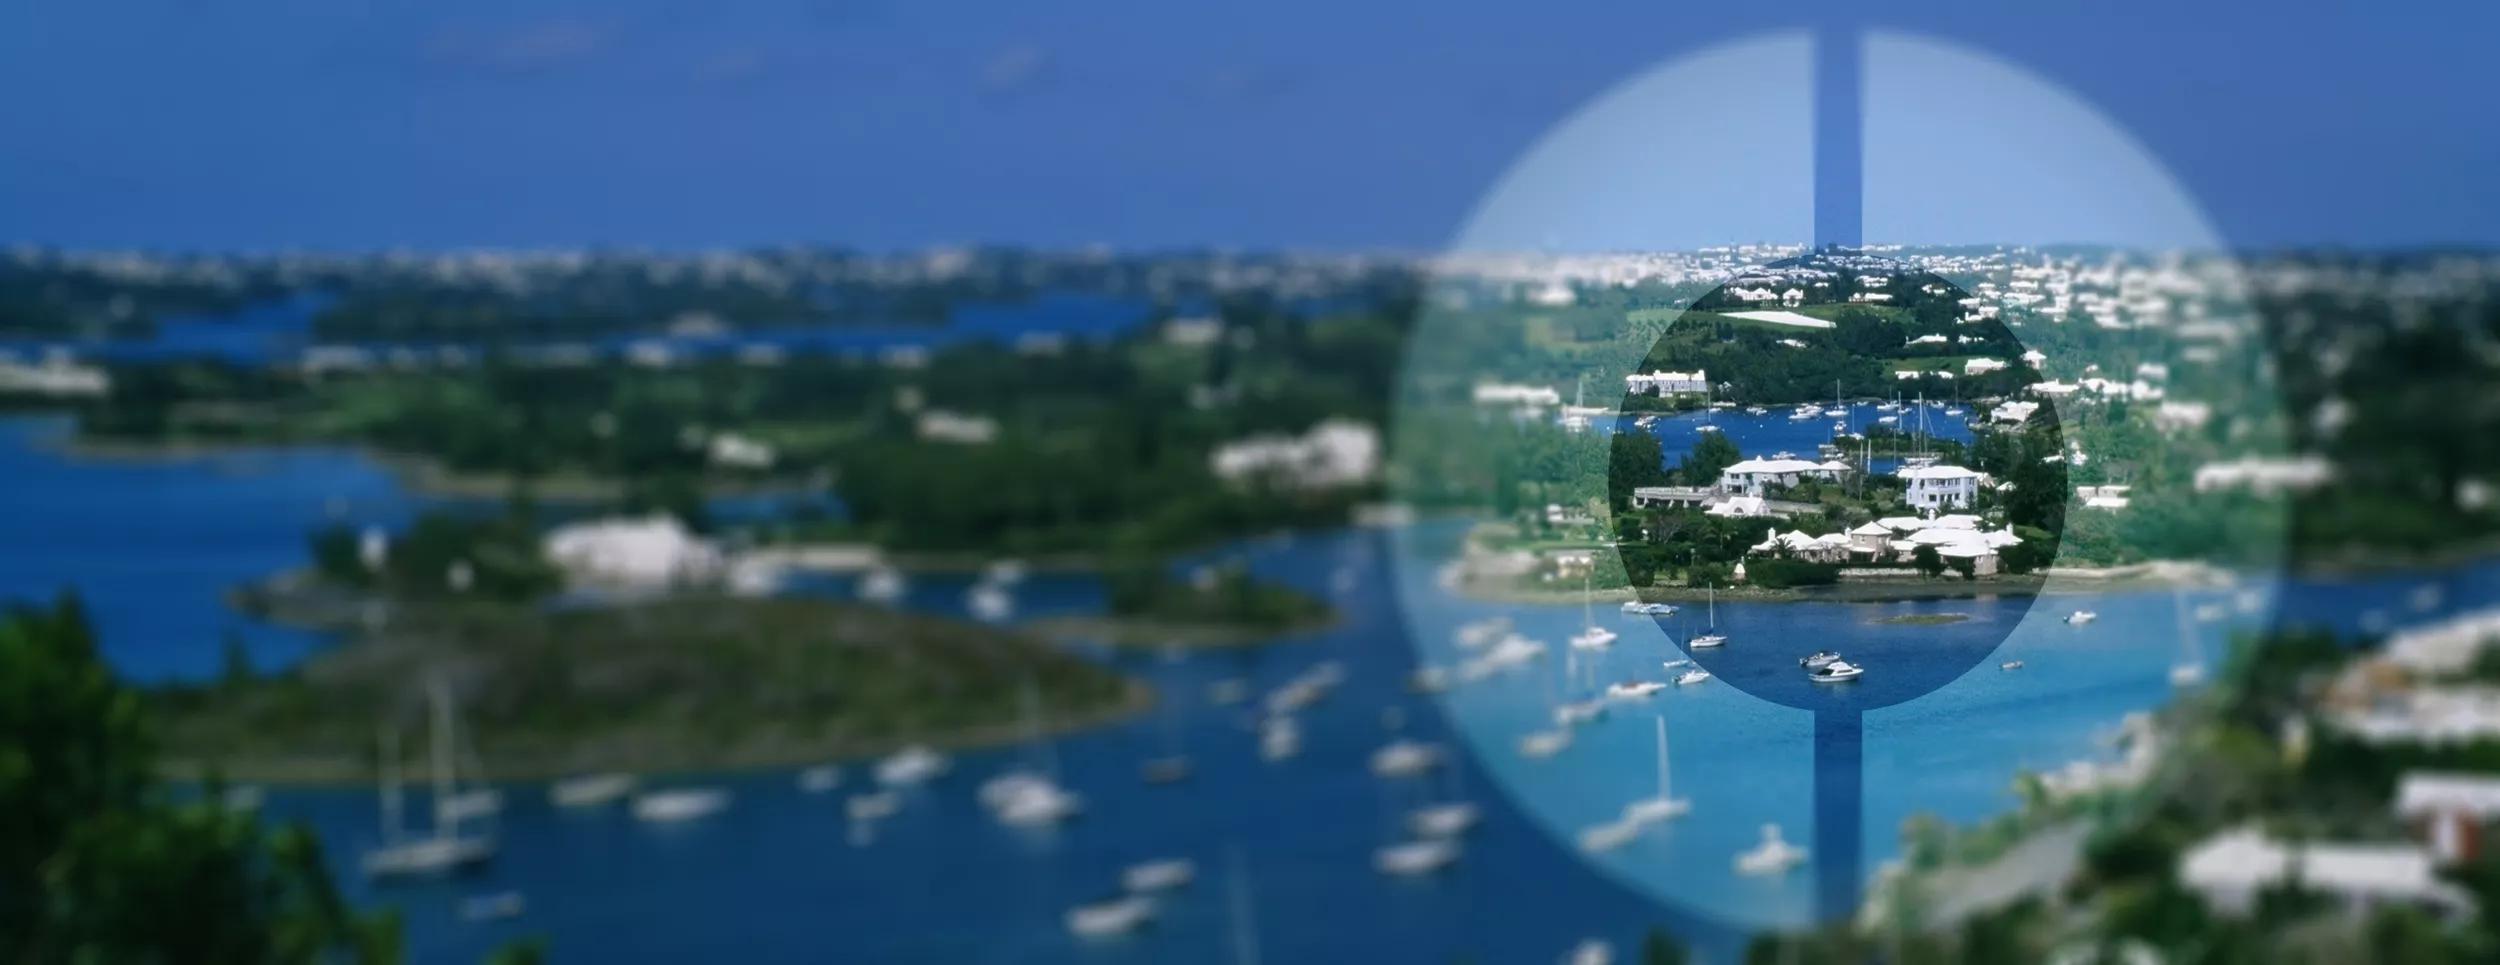 Banners cities with translucent lens 2880x1112